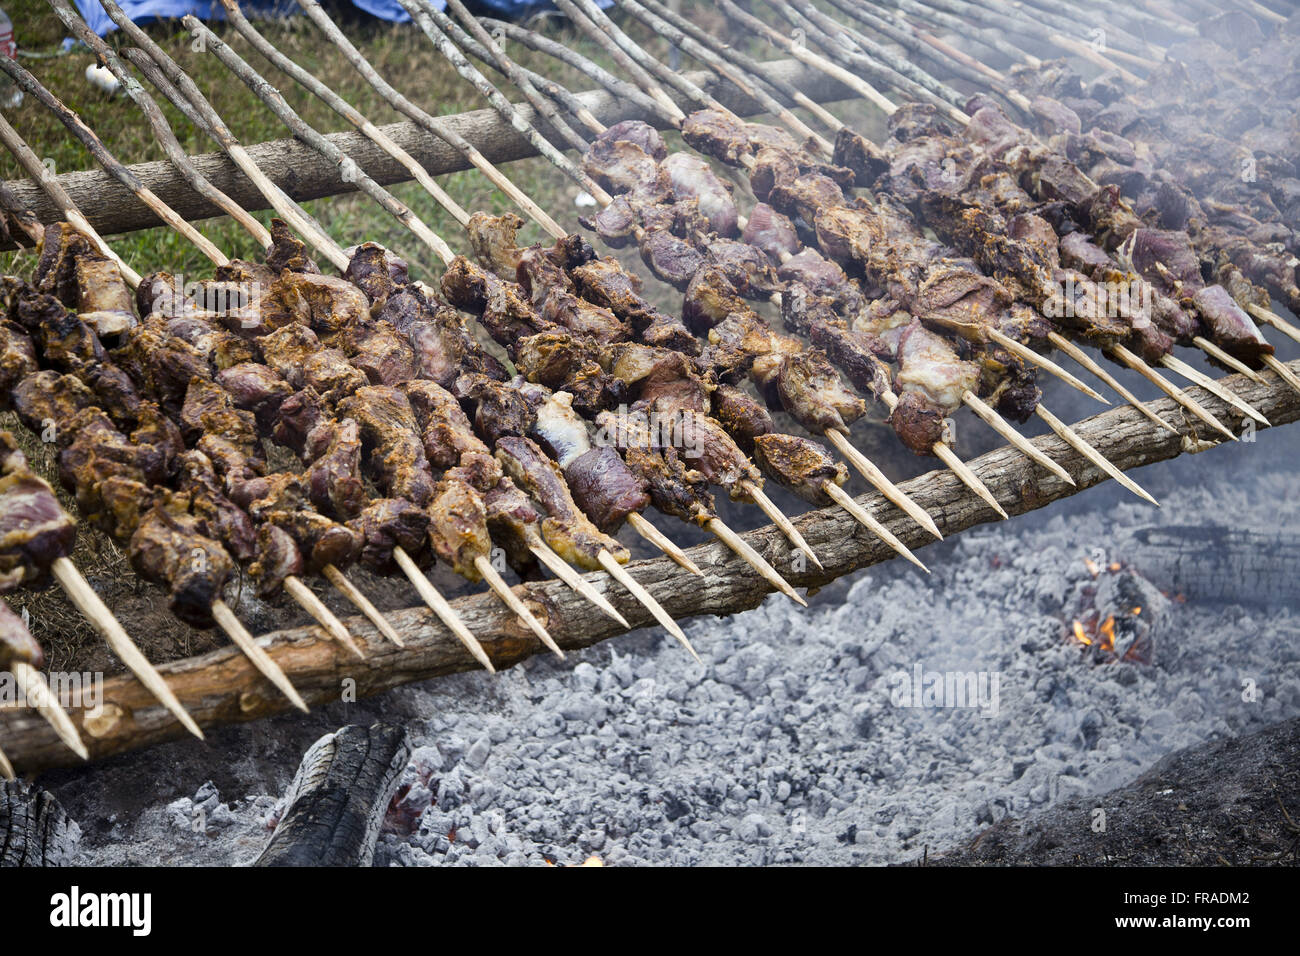 BBQ skewers offered by revelers in religious festivals Stock Photo